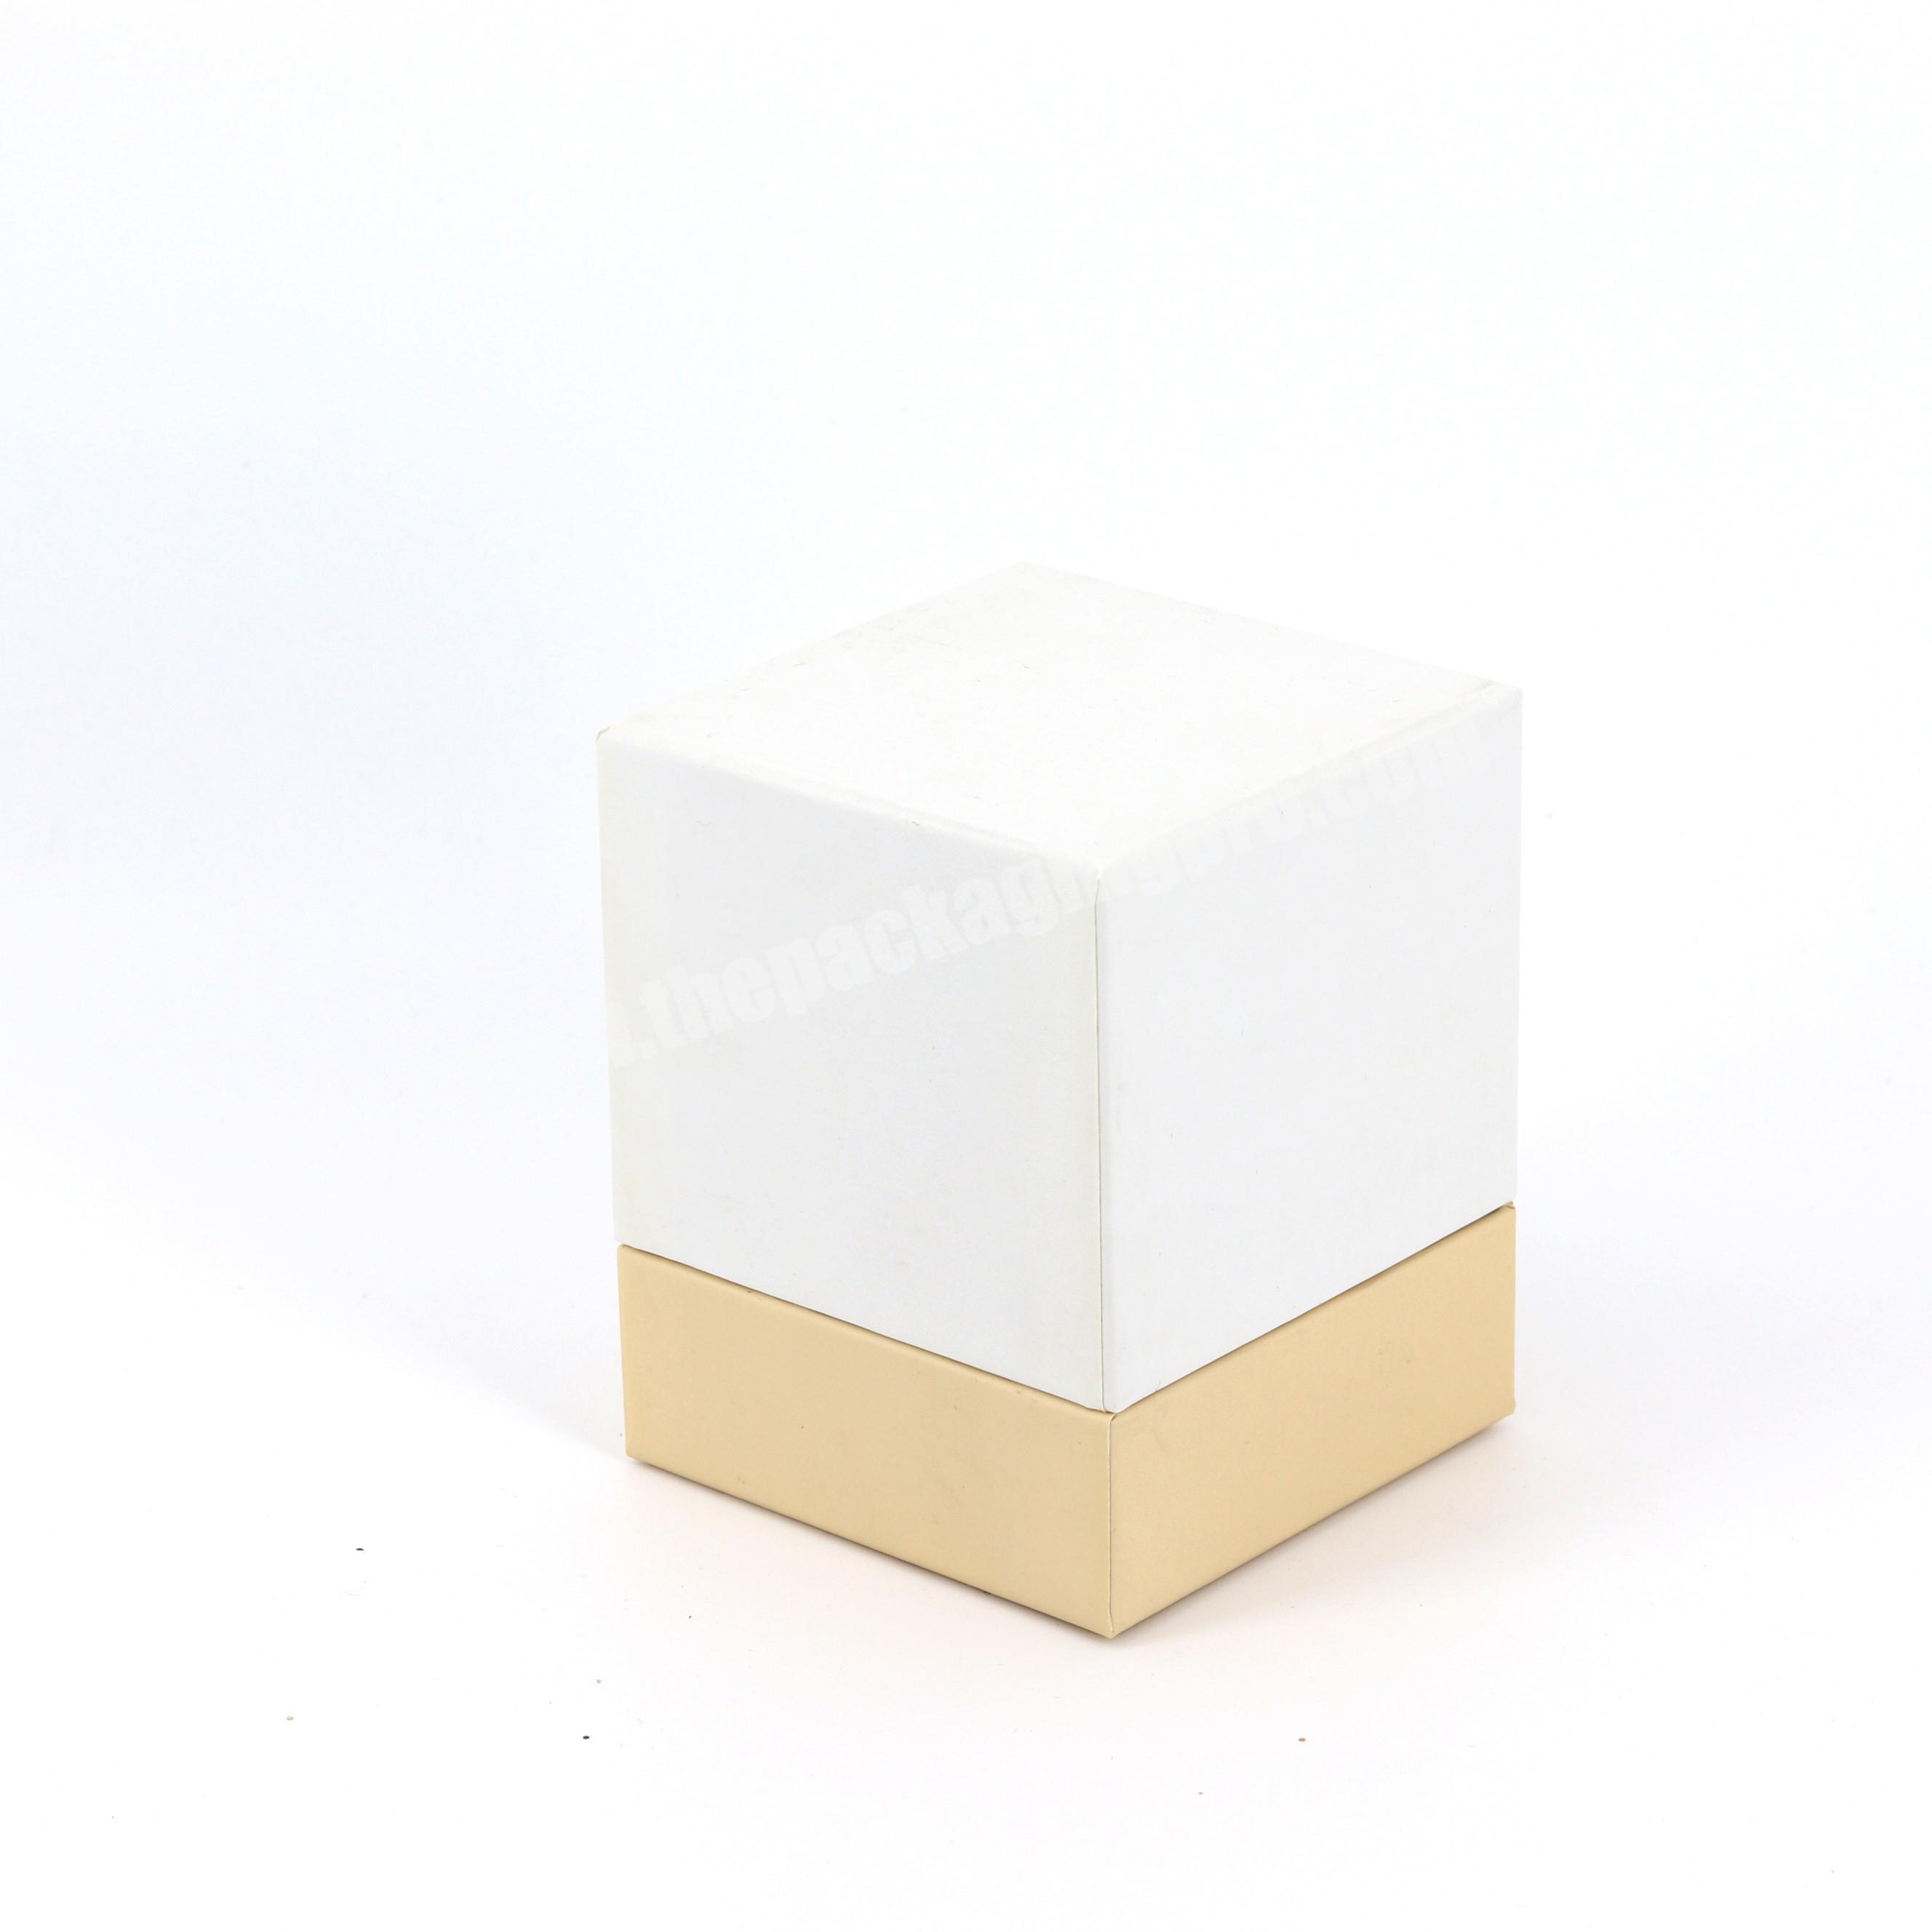 Wholesale High Quality Fancy Foam Insert Rigid Luxury Custom Candle Box Packaging Gift Box with Lid White